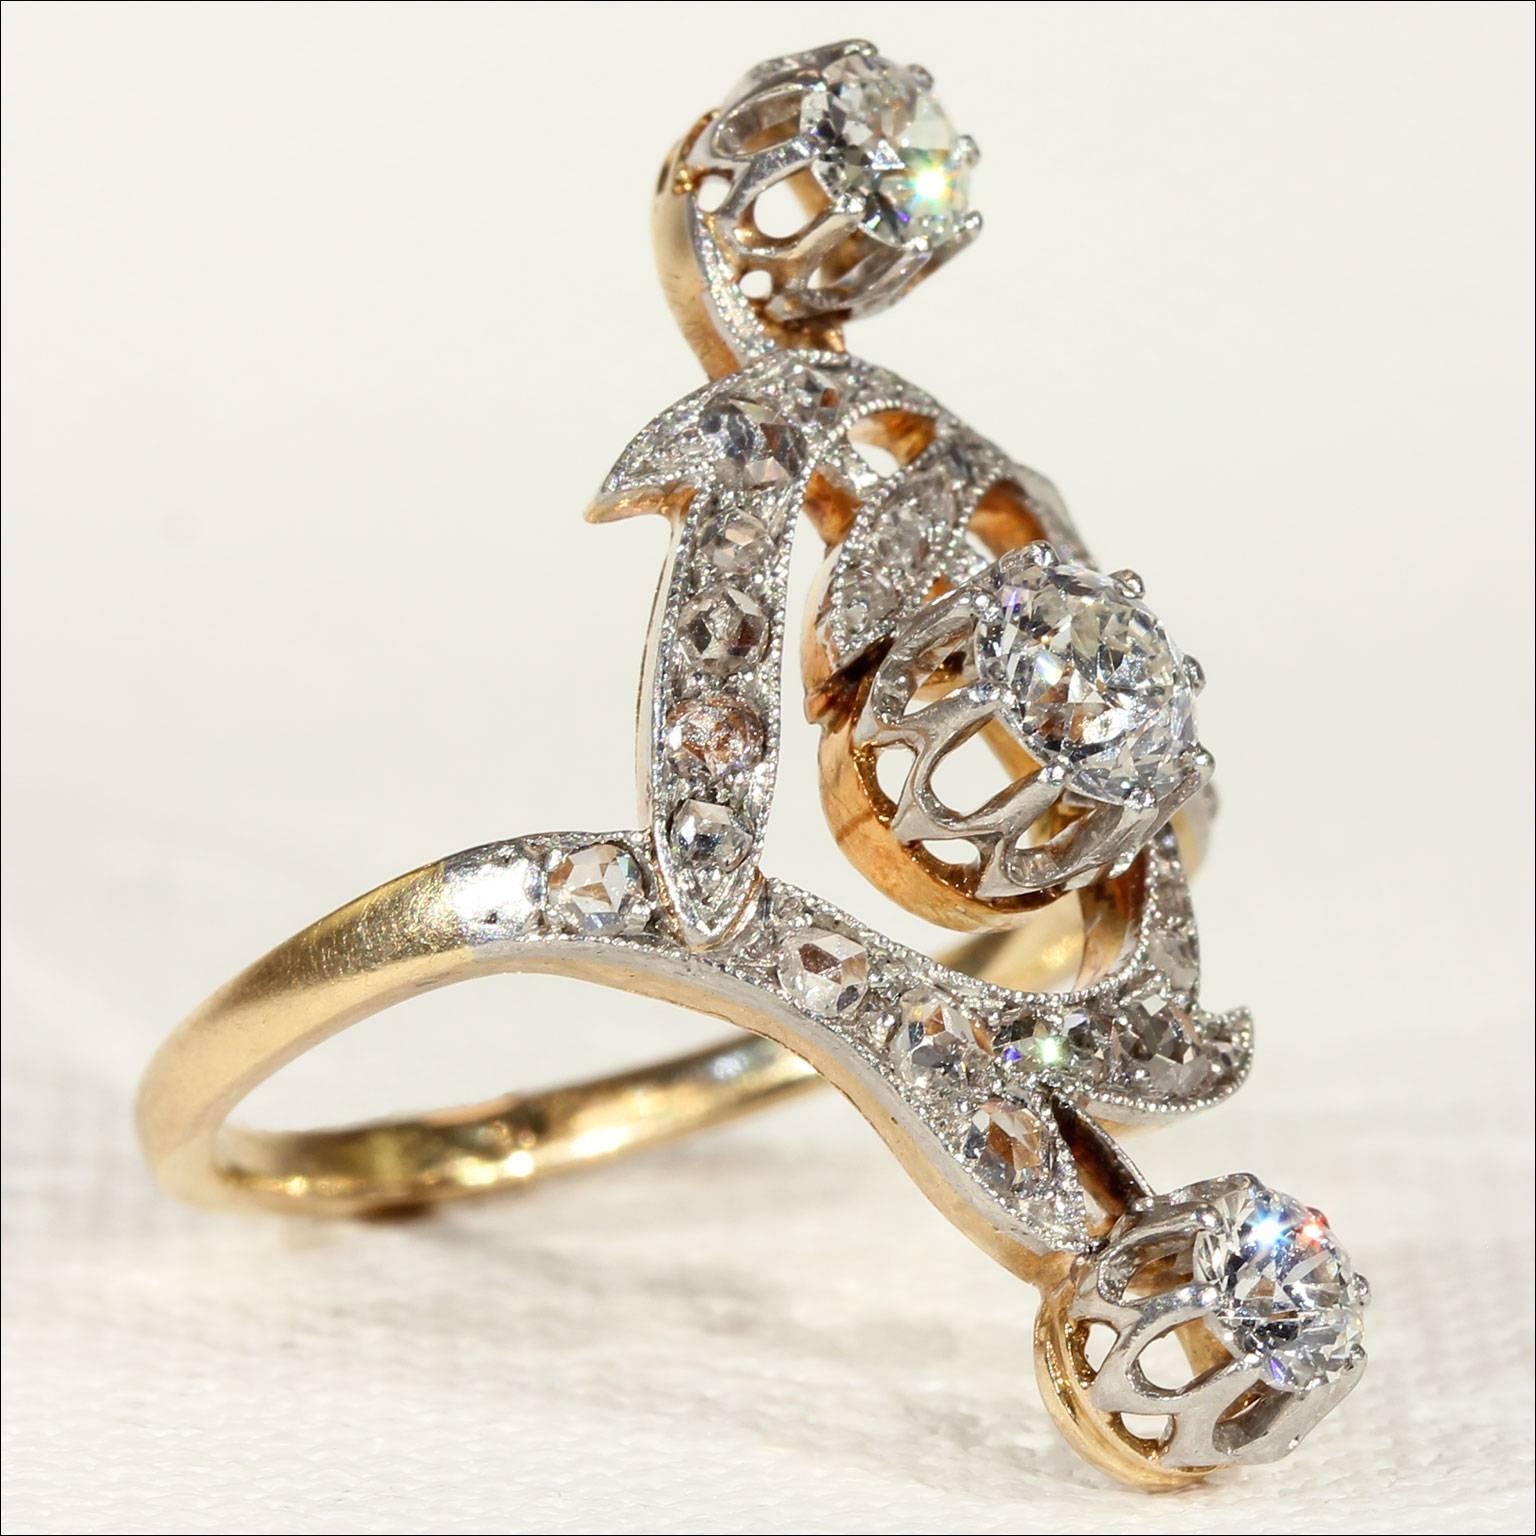 This Art Nouveau ring would be called Edwardian if it was English; not at all an ugly name, although perhaps a bit masculine for describing this delicately light and airy style. Luckily for this ring, it’s French, so it gets to go by a much better